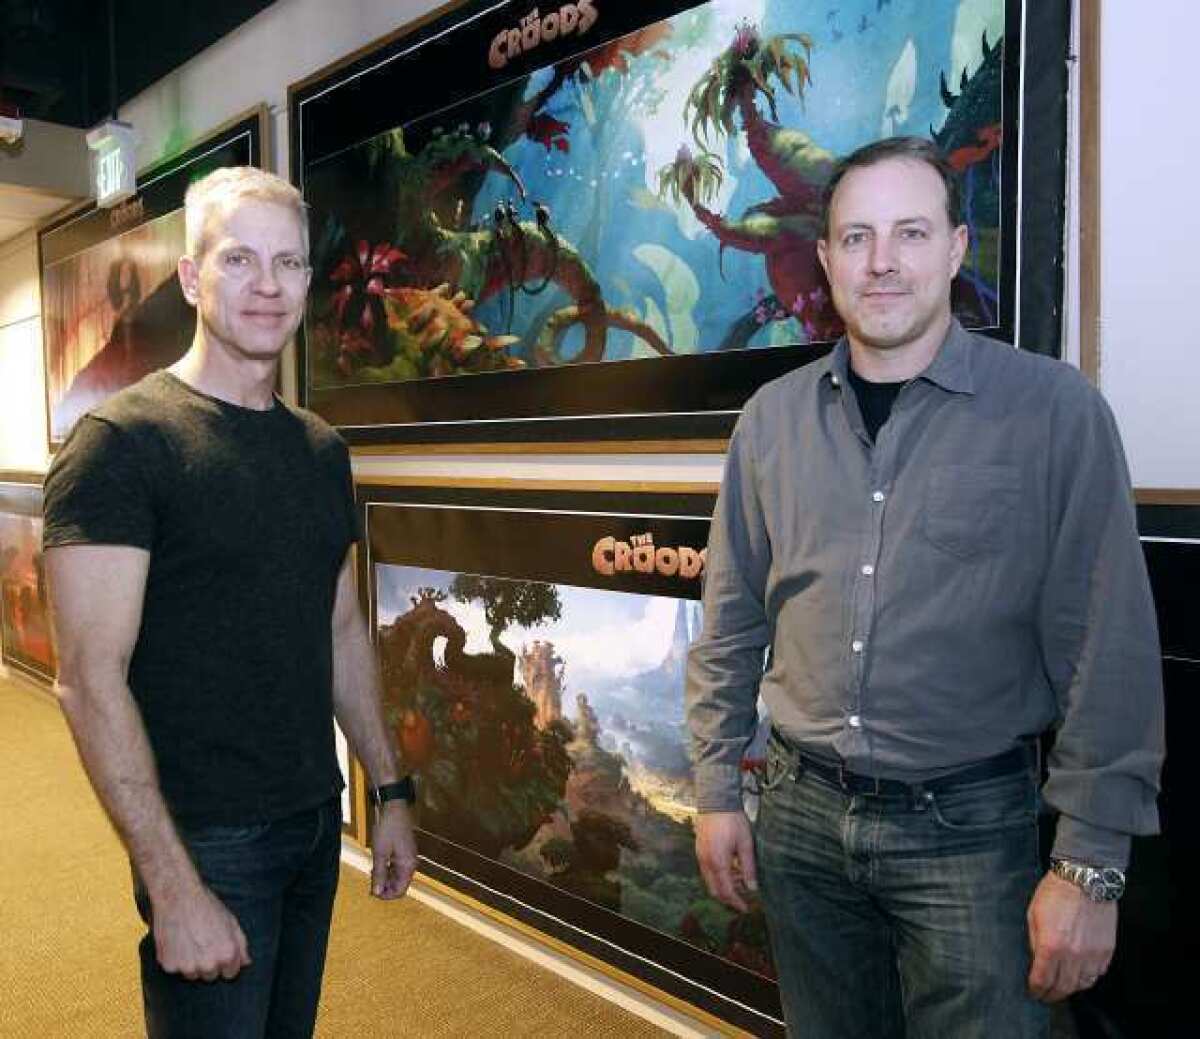 Chris Sanders, left, and Kirk De Micco, right, at the DreamWorks SKG campus in Glendale on Thursday, March 21, 2013. De Micco and Sanders directed the animated film "The Croods." (Raul Roa/Staff Photographer)